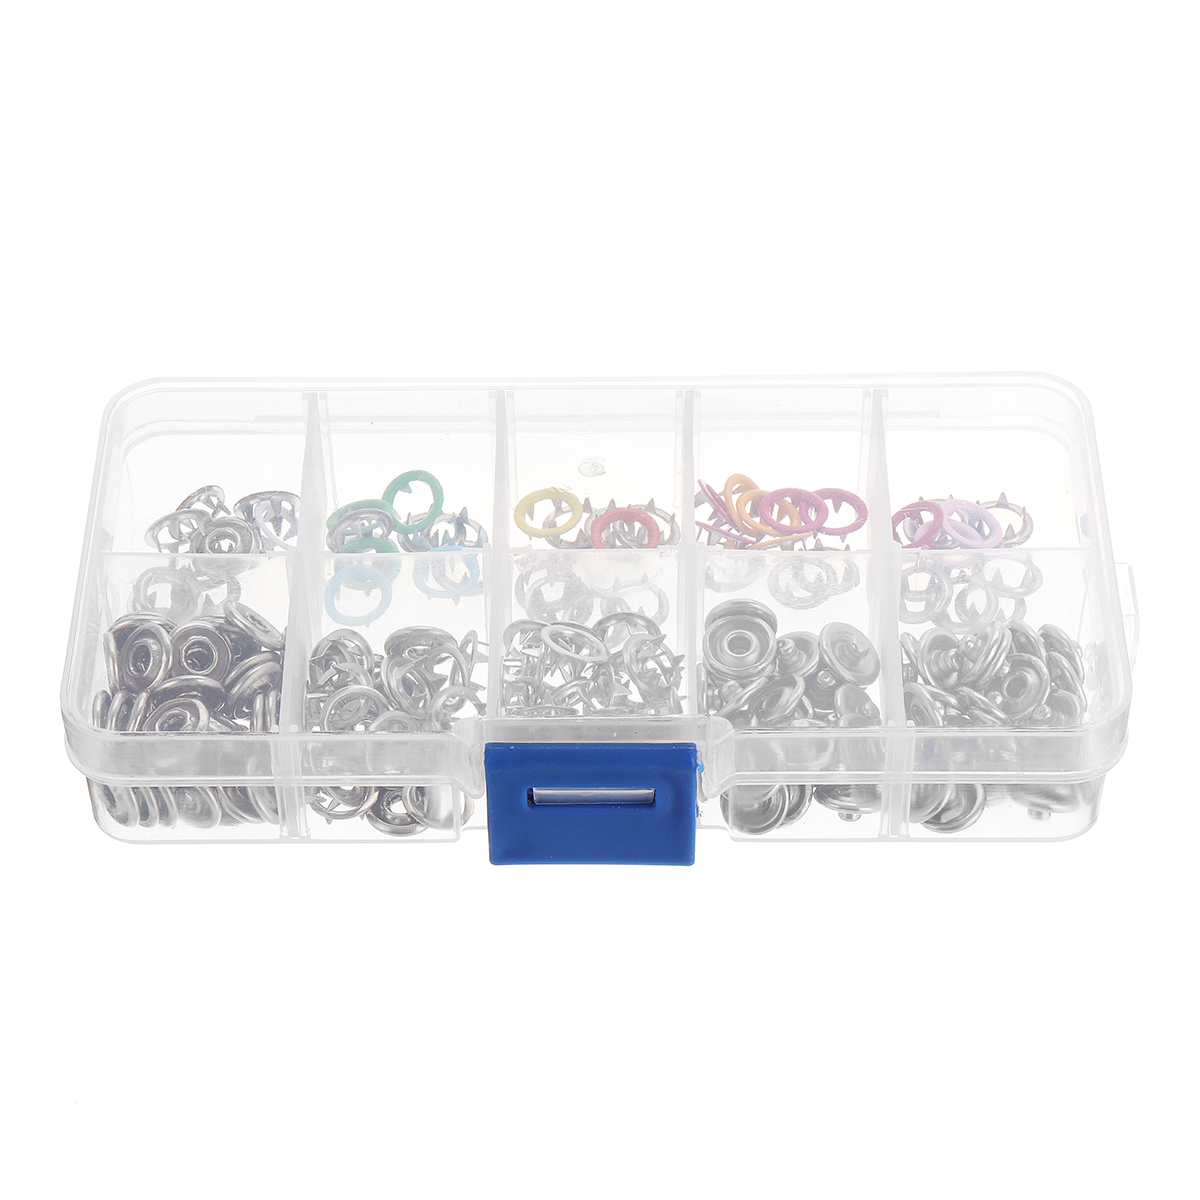 5-Sets-10-Colors-of-Hollow-Five-Claws-of-Box-Set-Total-Buttons-Metal-Sewing-Press-Studs-Snap-Fastene-1547188-2